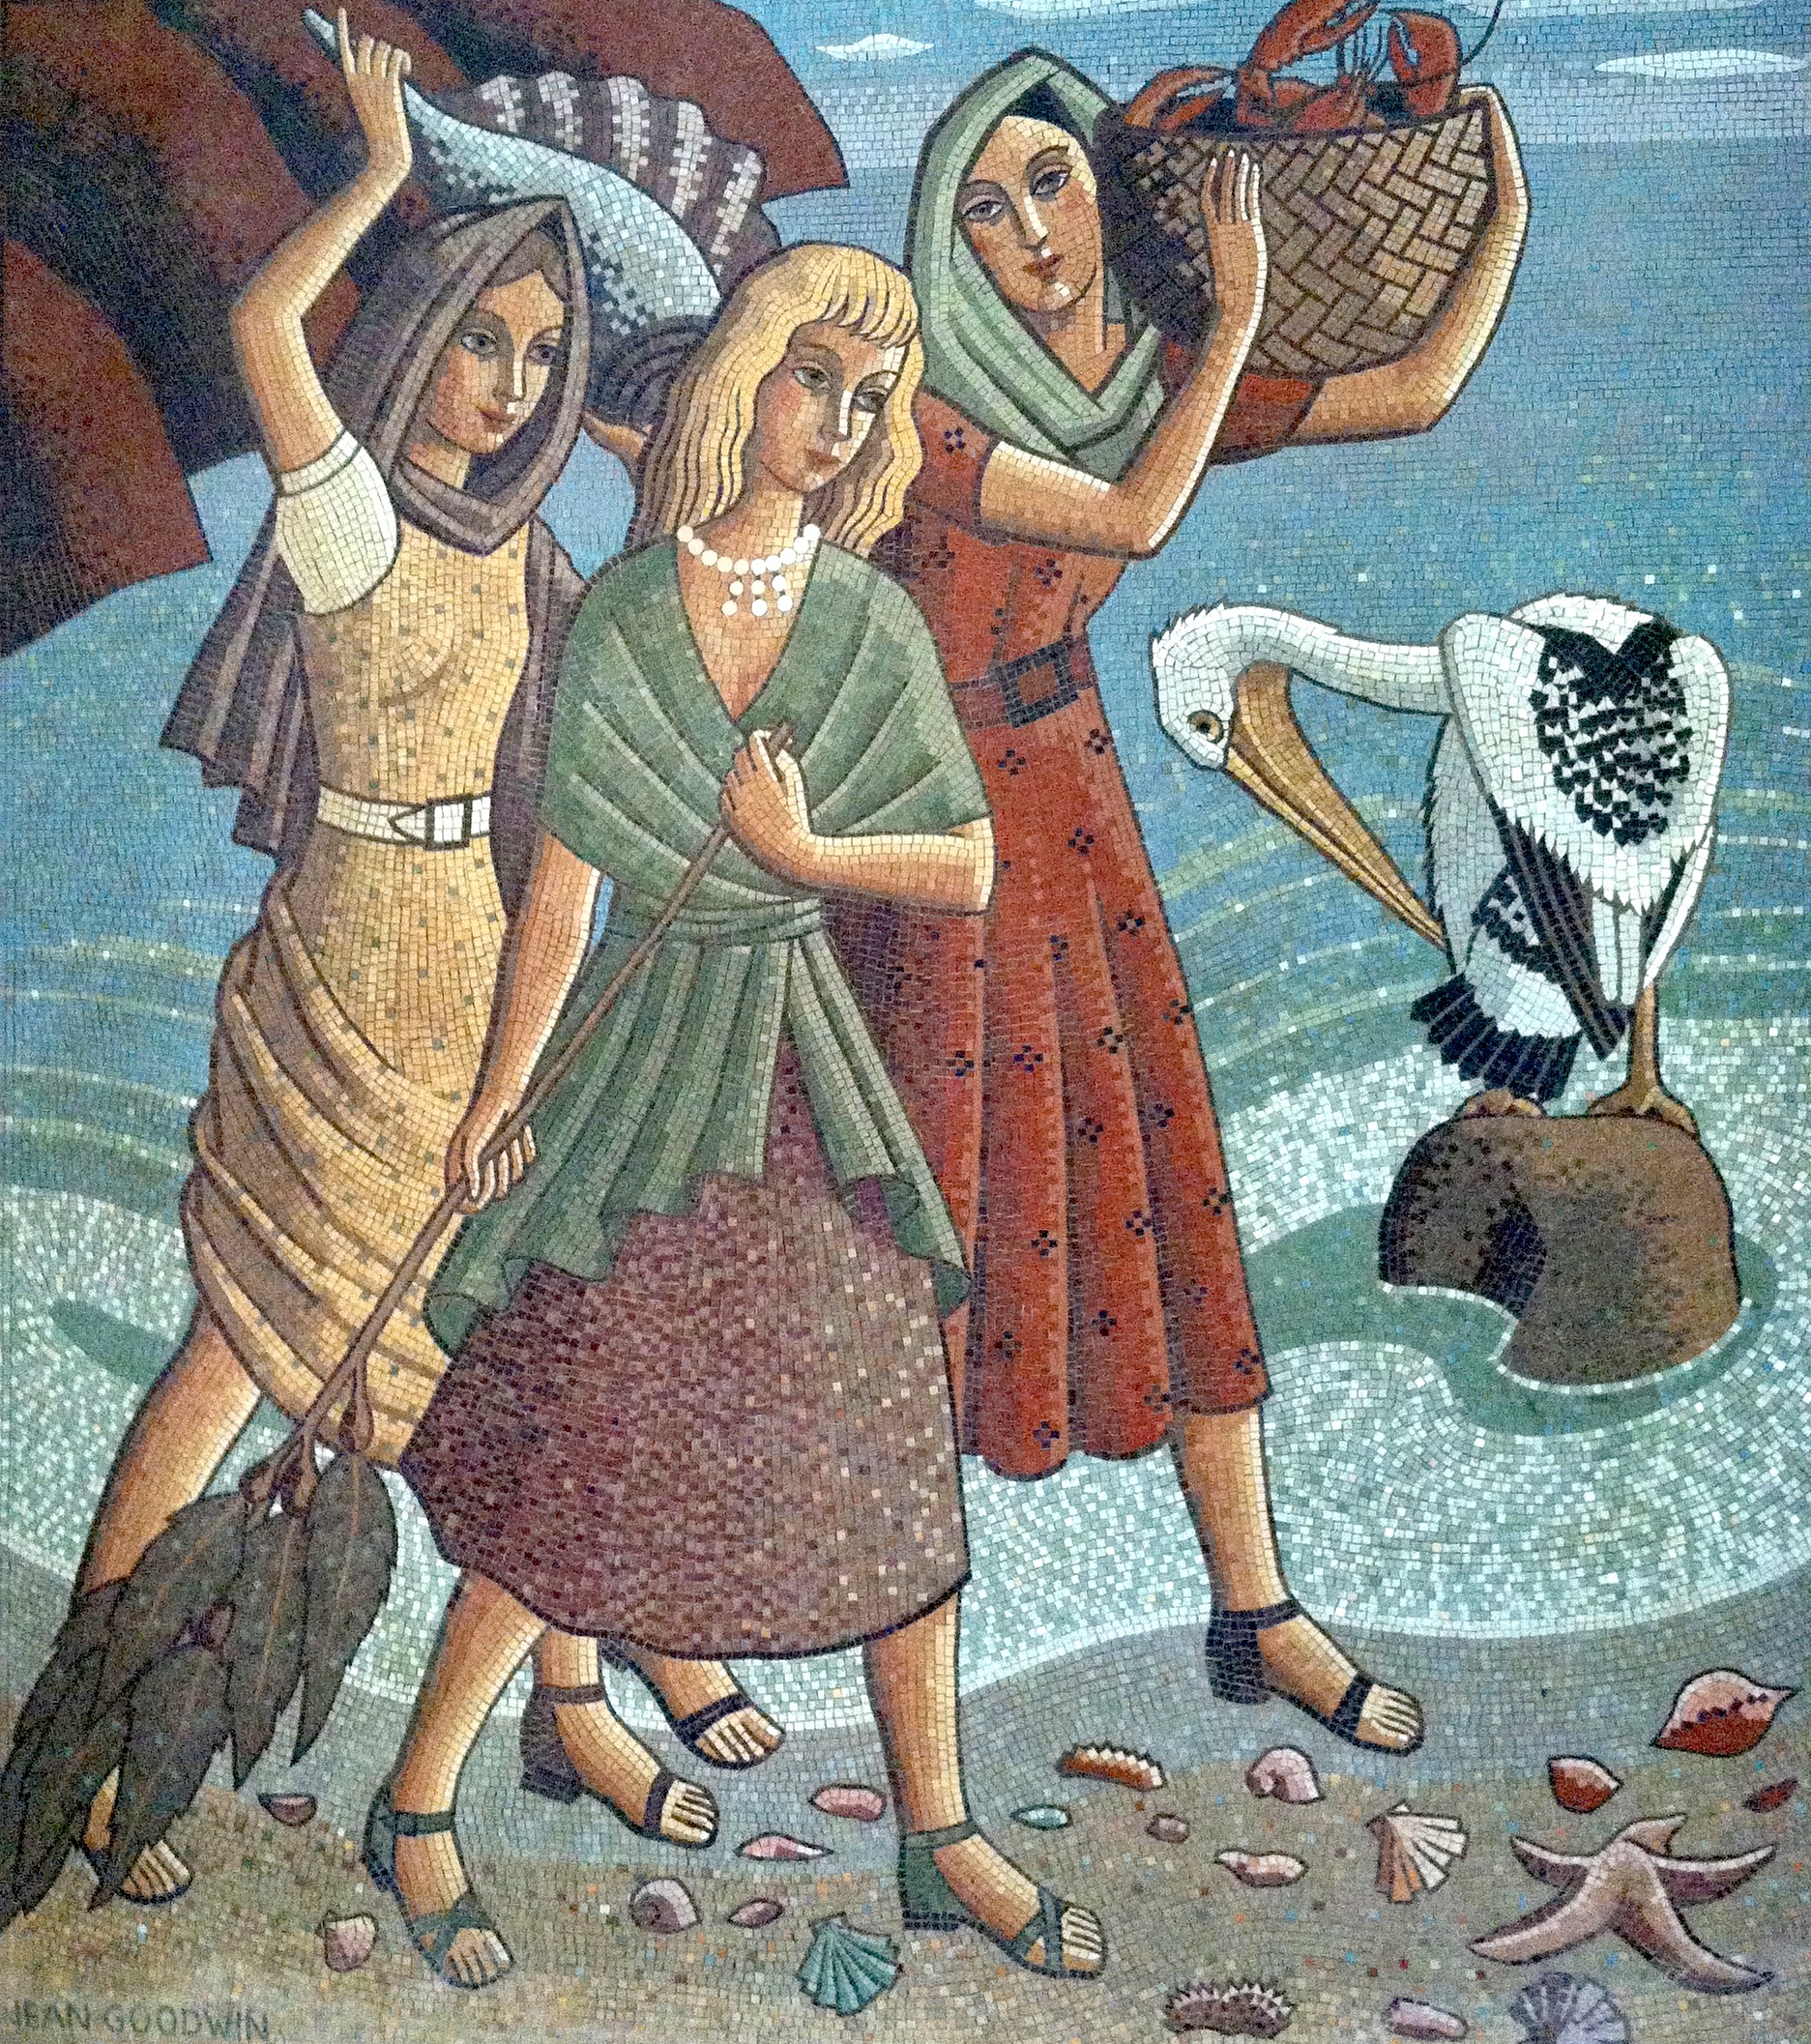 Jean Goodwin (later Ames), "Three Women Gathering at the Sea Shore," WPA mosaic for Newport Harbor Union High School, 1937.